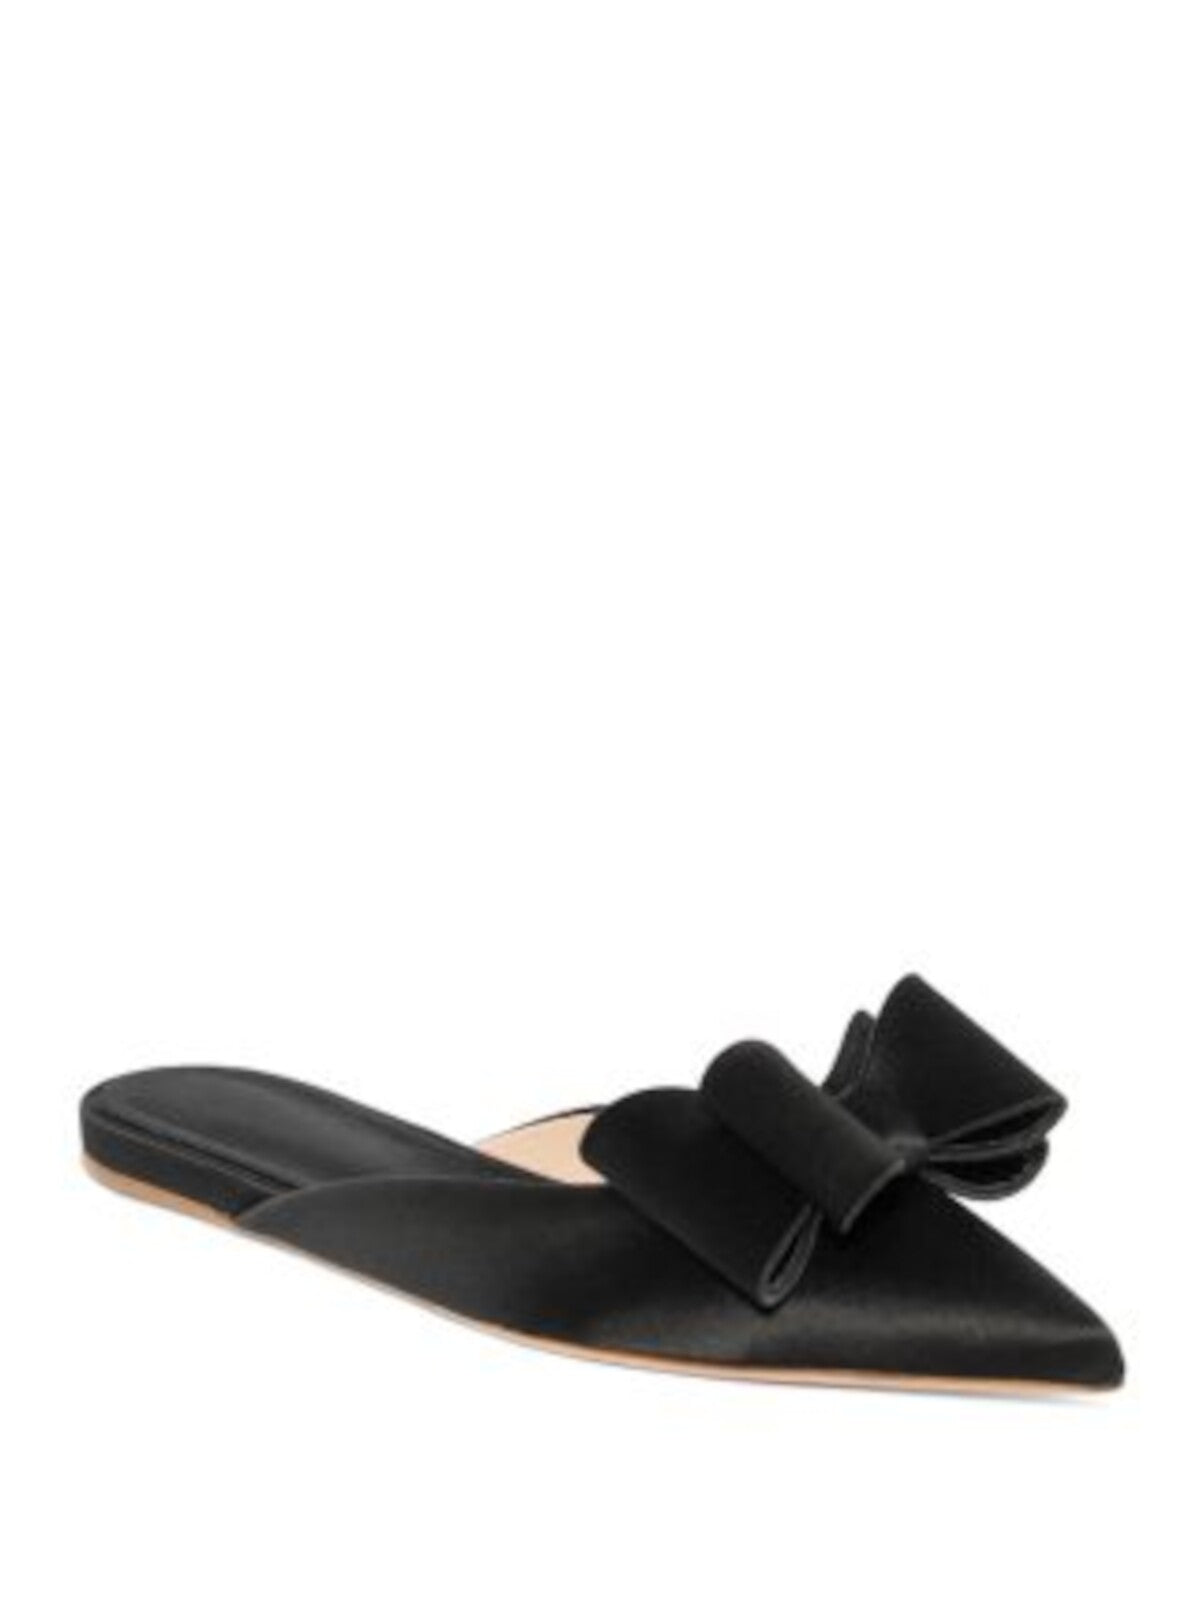 GIAMBATTISTA VALLI Womens Black Bow Accent Pointed Toe Slip On Leather Dress Mules 39.5